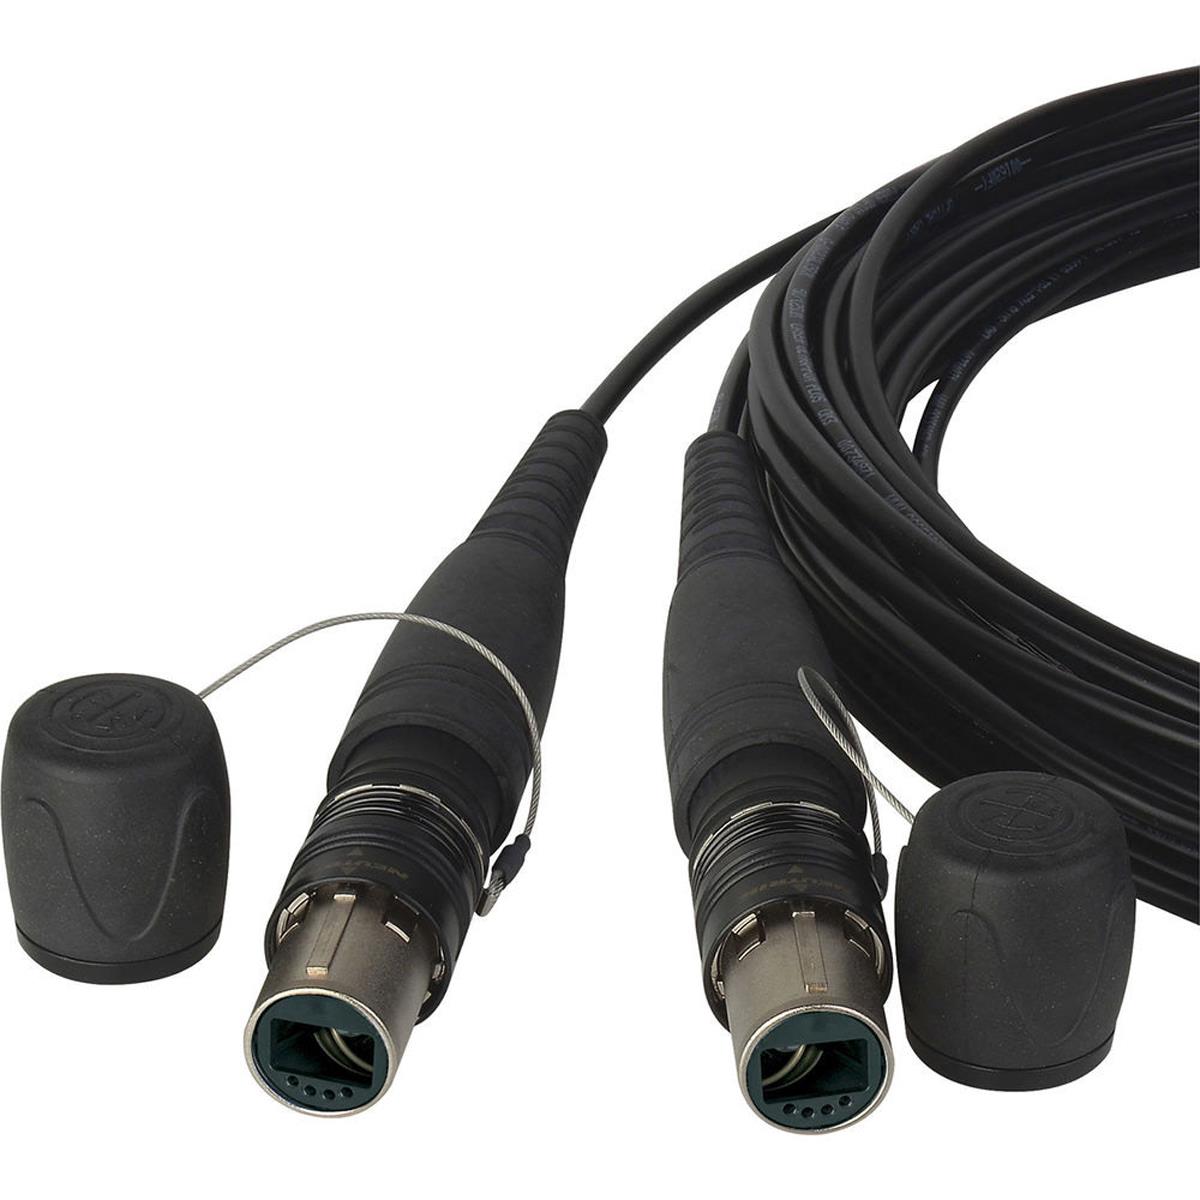 Image of Camplex 15' opticalCON DUO to DUO Multimode Fiber Optic Tactical Snake Cable